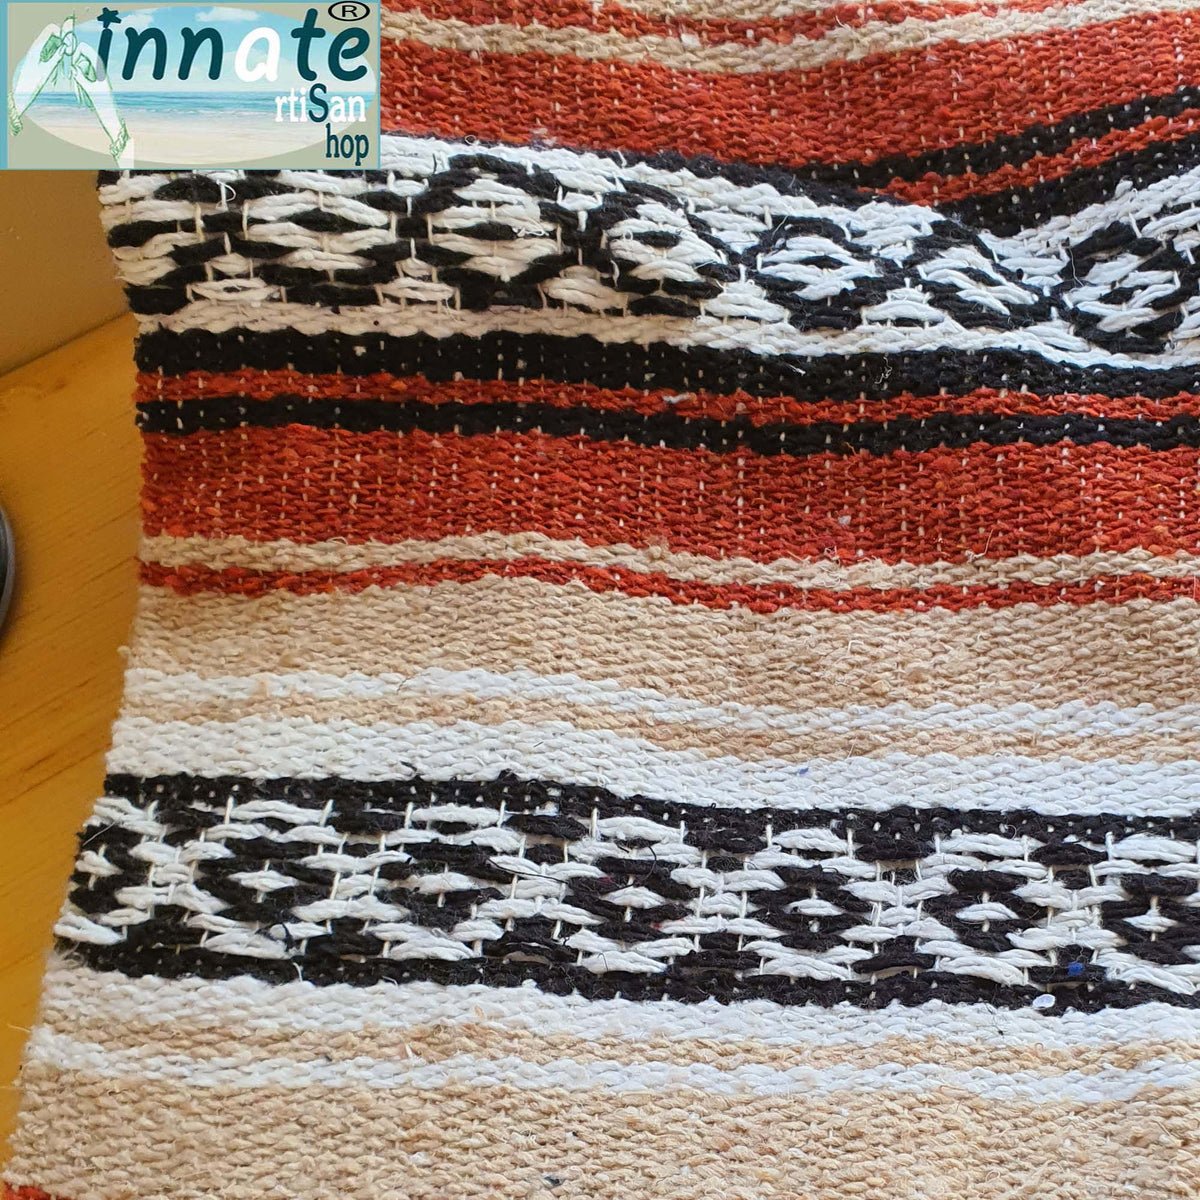 rustic, placemats, placements, blanket, Mexican, loom made, rustic placemats, manteles individuales rusticos, farmhouse placemats, blanket placemats, artisan, brown, beige, terracotta, rust color